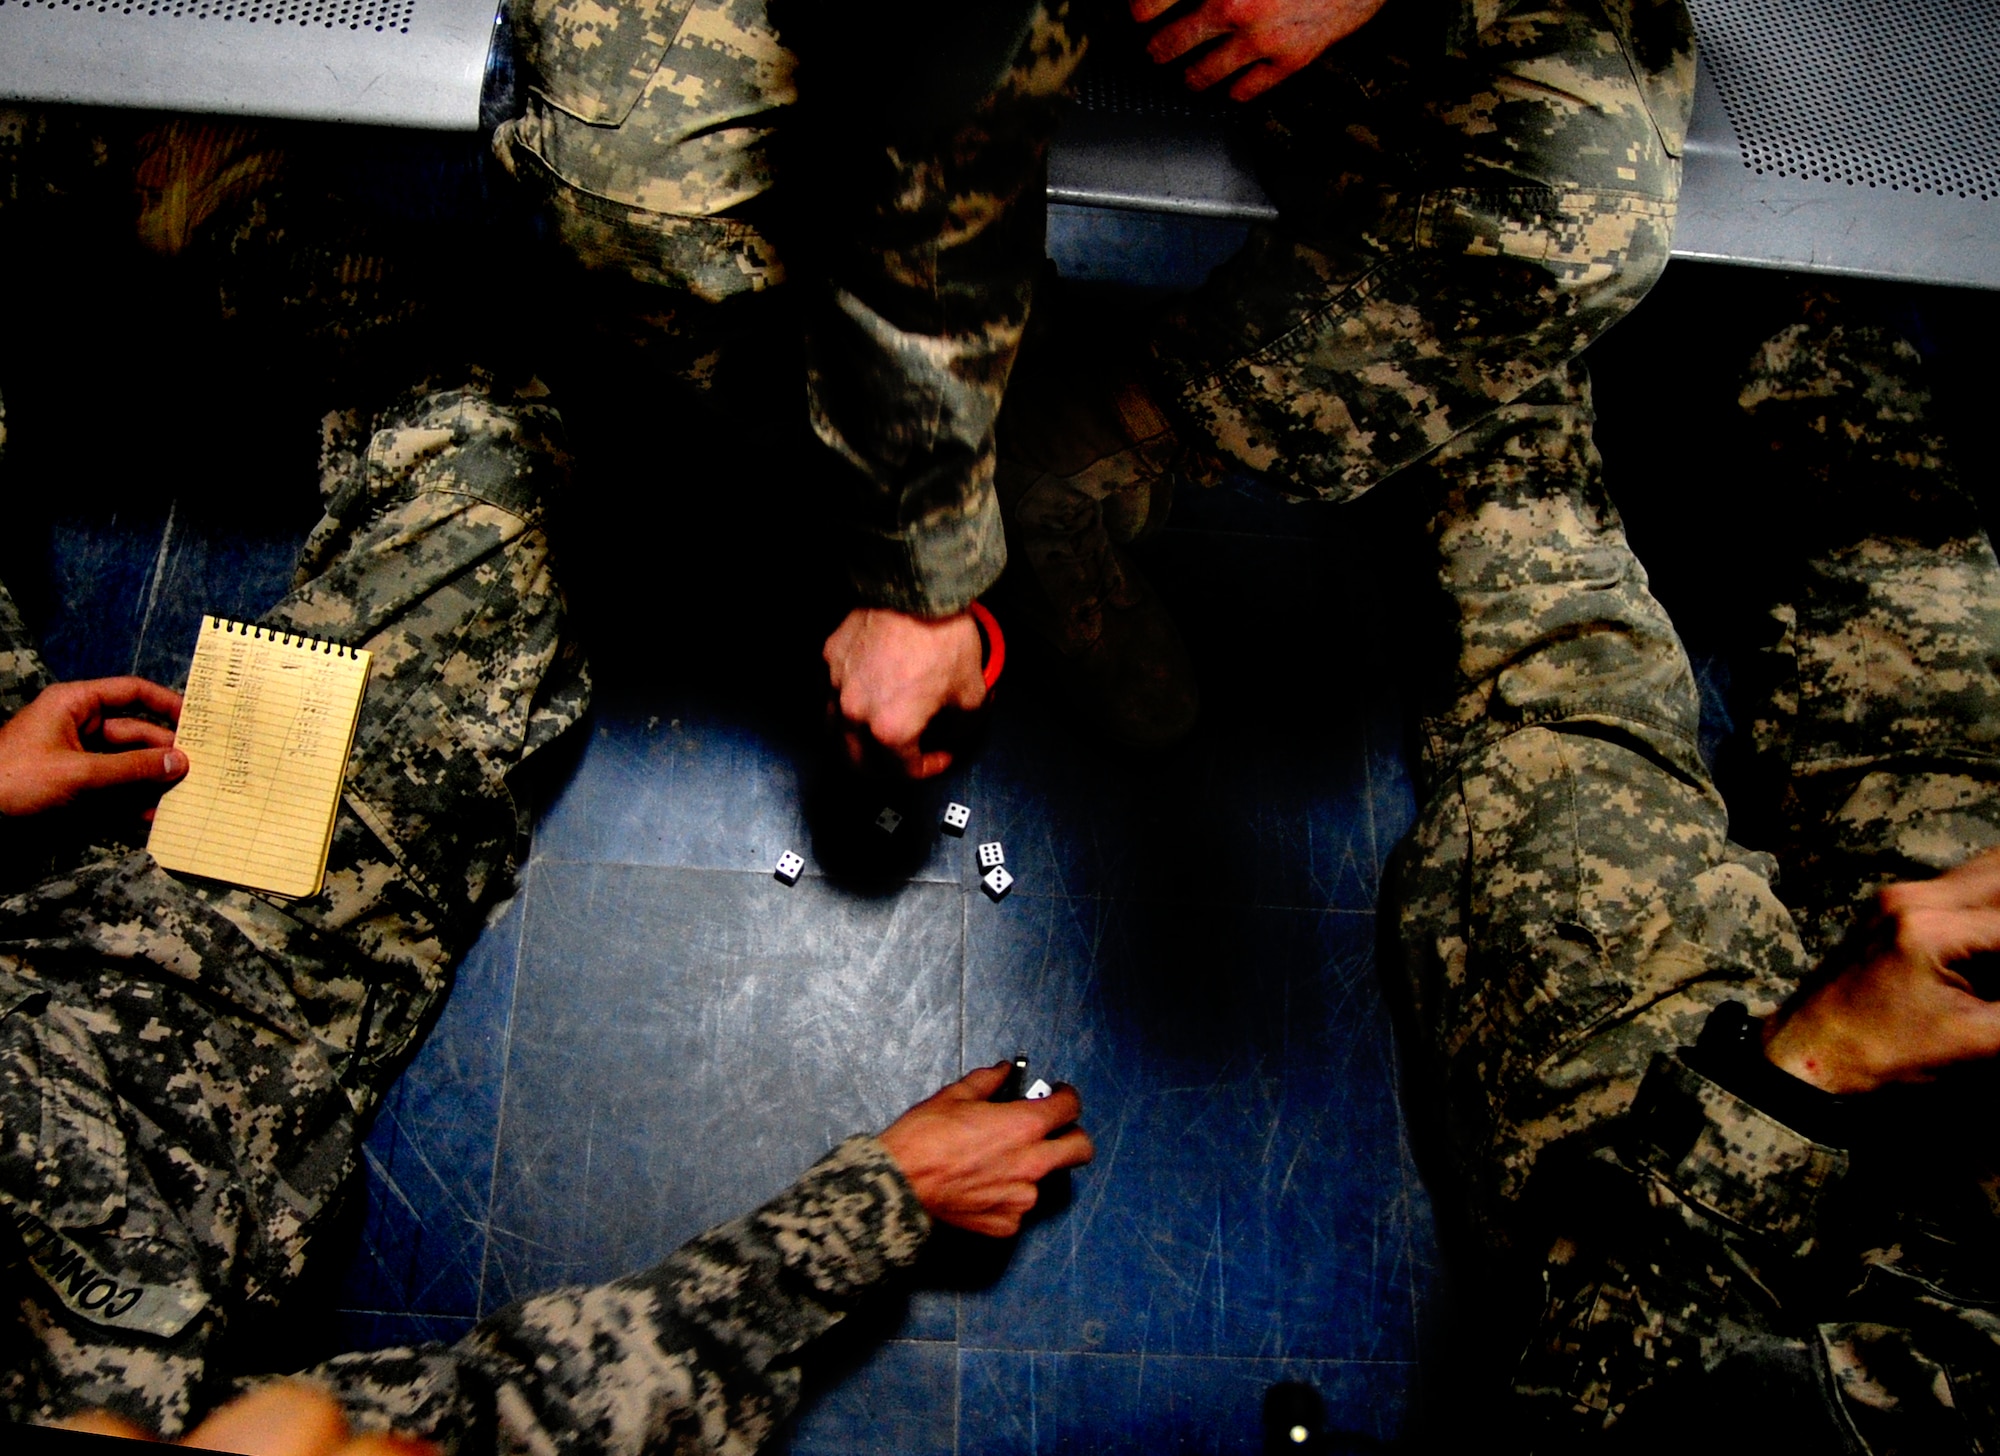 Three soldiers play a Farkle dice game while waiting for transport at the passenger terminal Ali Base, Iraq on Aug. 26, 2011. The terminal is the southern aerial hub of Iraq.  It processes approximately 5,000 passengers and 850,000 pounds of cargo each month. (U.S. Air Force photo/Master Sgt. Cecilio Ricardo)